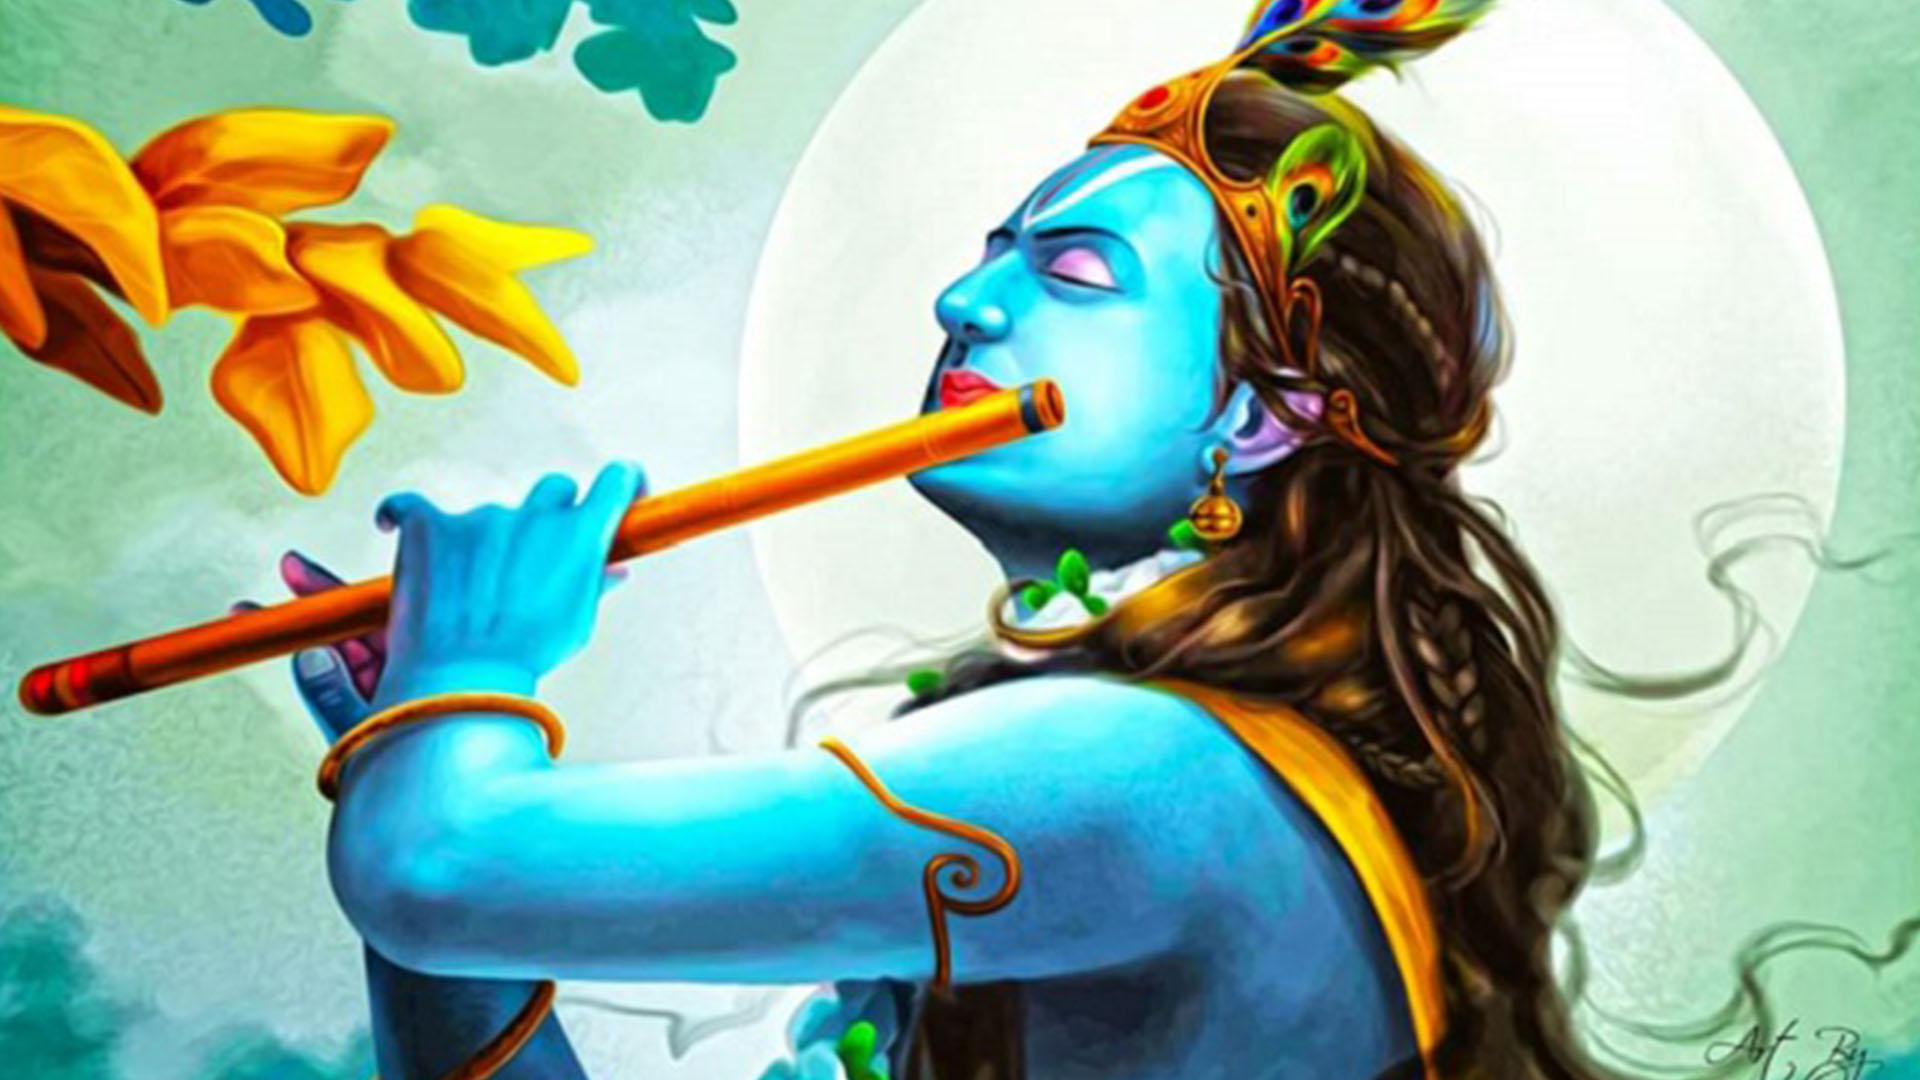 Shree Krishna Janmastami being observed today - public celebrations and events cancelled